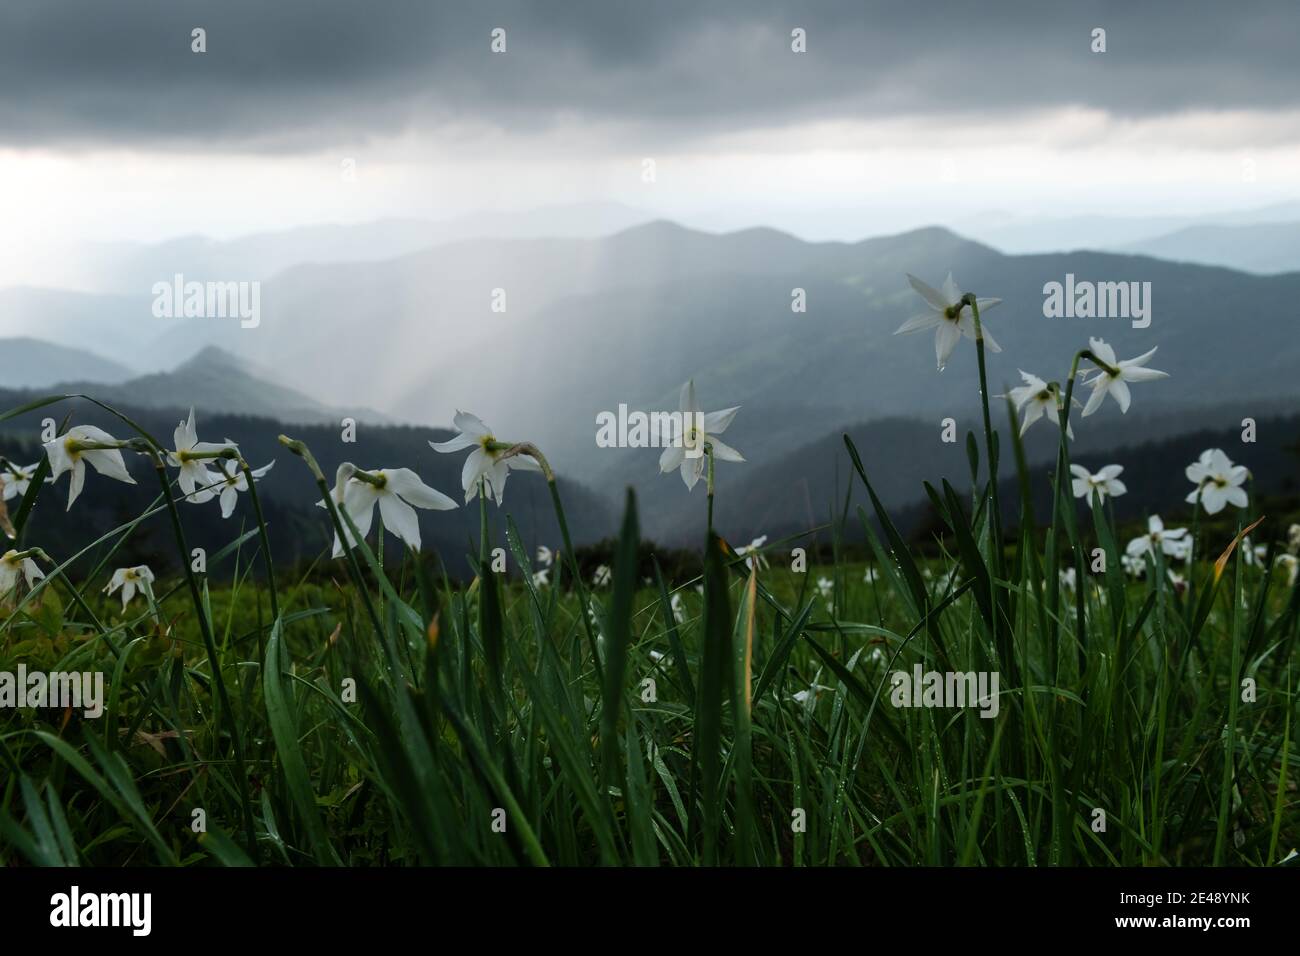 Mountain meadow covered with white narcissus flowers. Carpathian mountains, Europe. Landscape photography Stock Photo